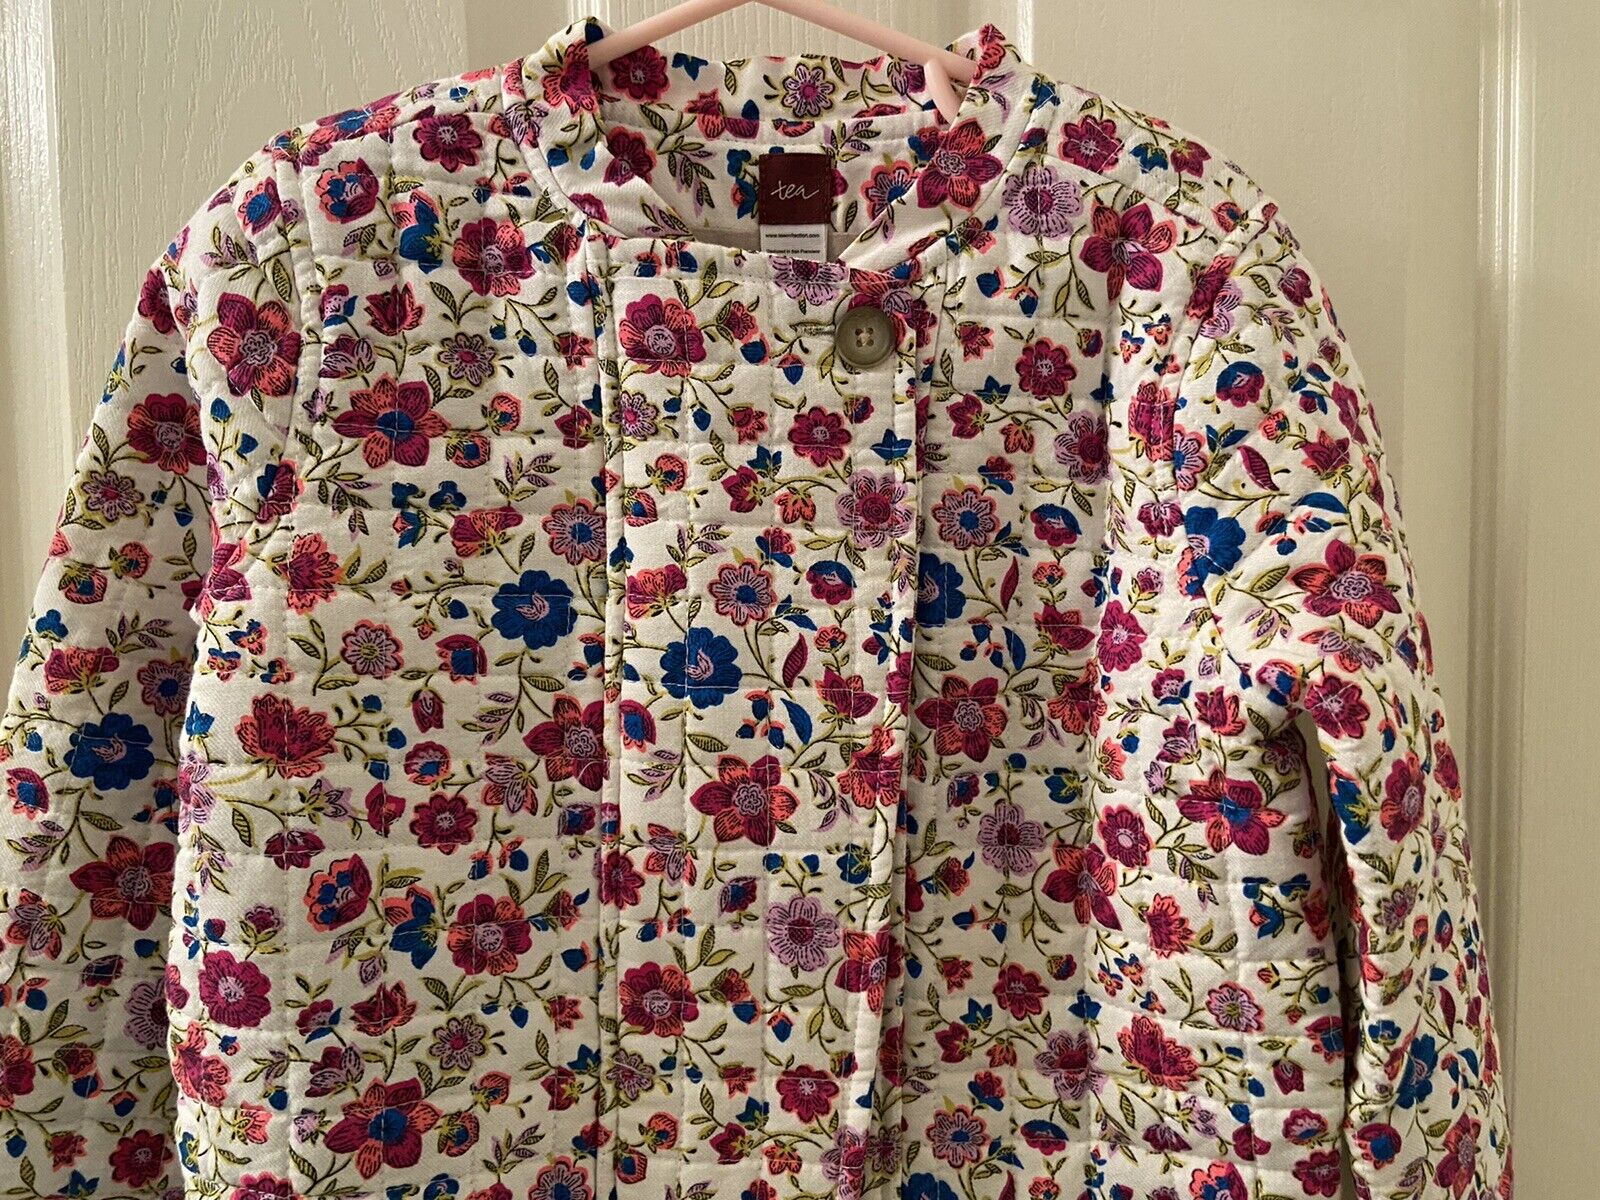 Tea Collection Mercado Rodriguez Floral Quilted Jacket Girls Size Small 4-5 NWT Tea Collection Mercado Rodriguez Jacket - фотография #3